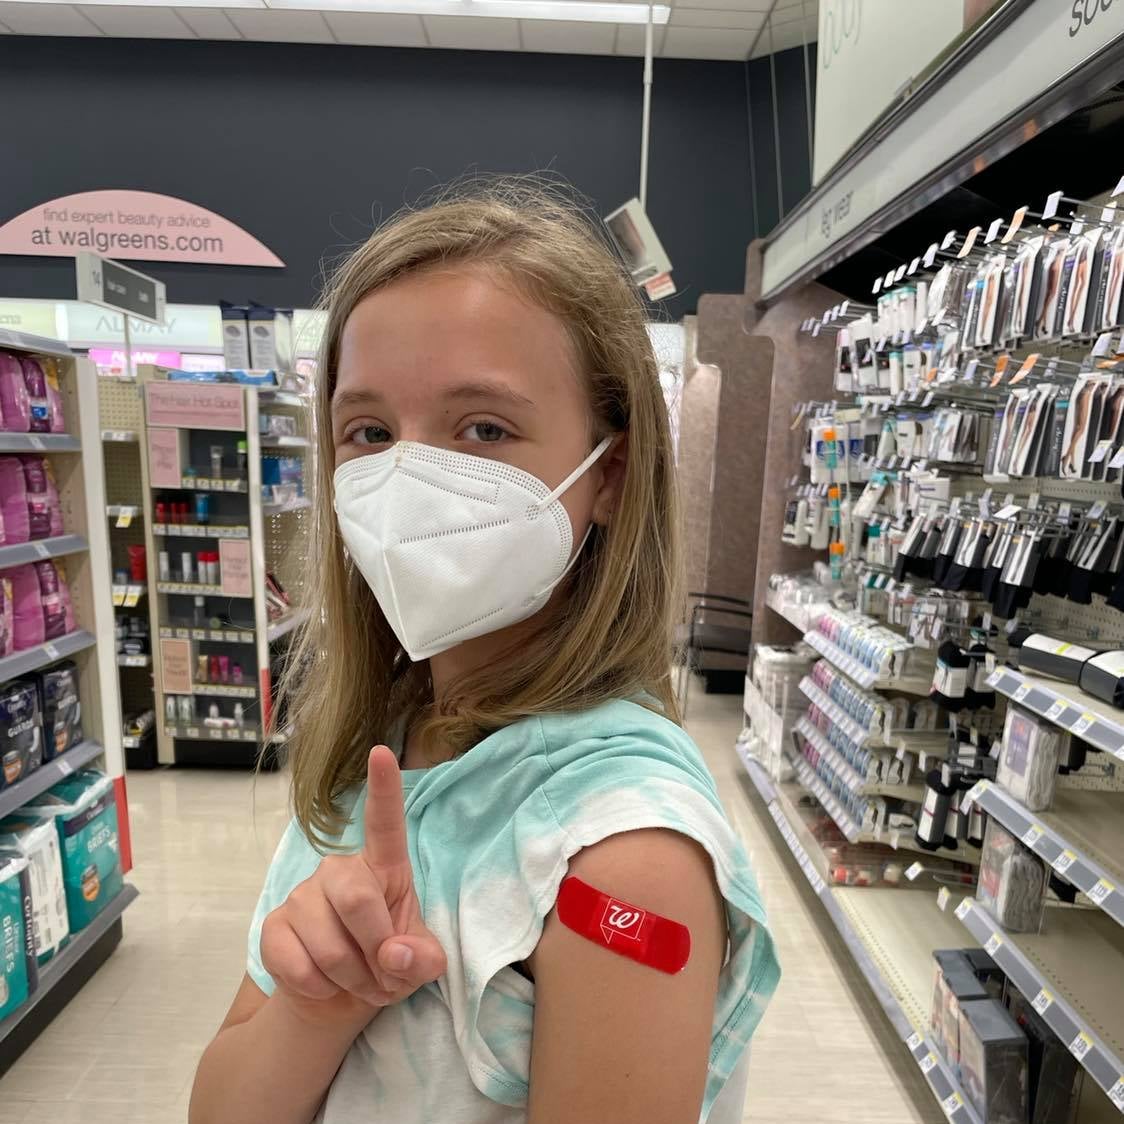 A girl standing in a pharmacy holds her finger up. She is wearing a mask and a rolled up sleeve shows a band-aid on her arm.